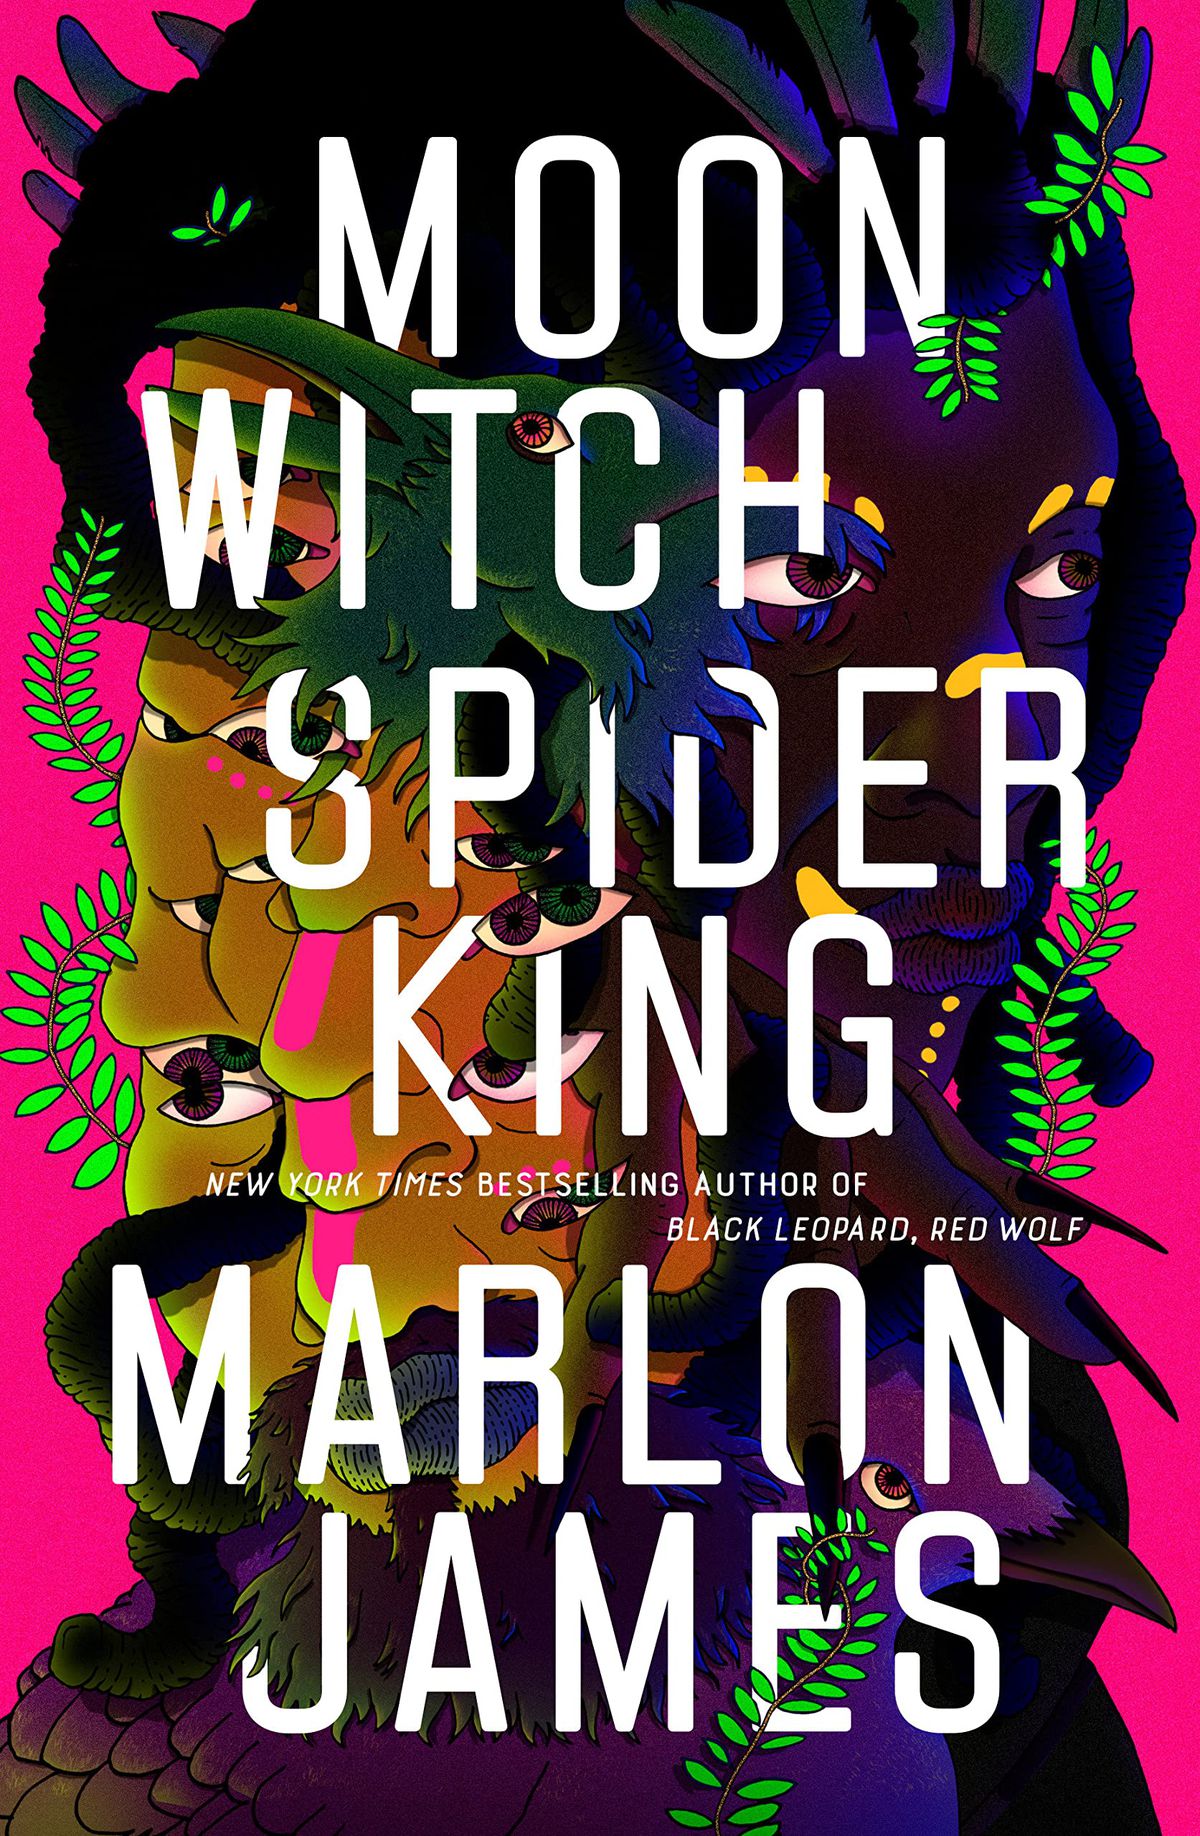 The cover for Moon Witch, Spider King showing a collaged graphic against a bright pink backdrop